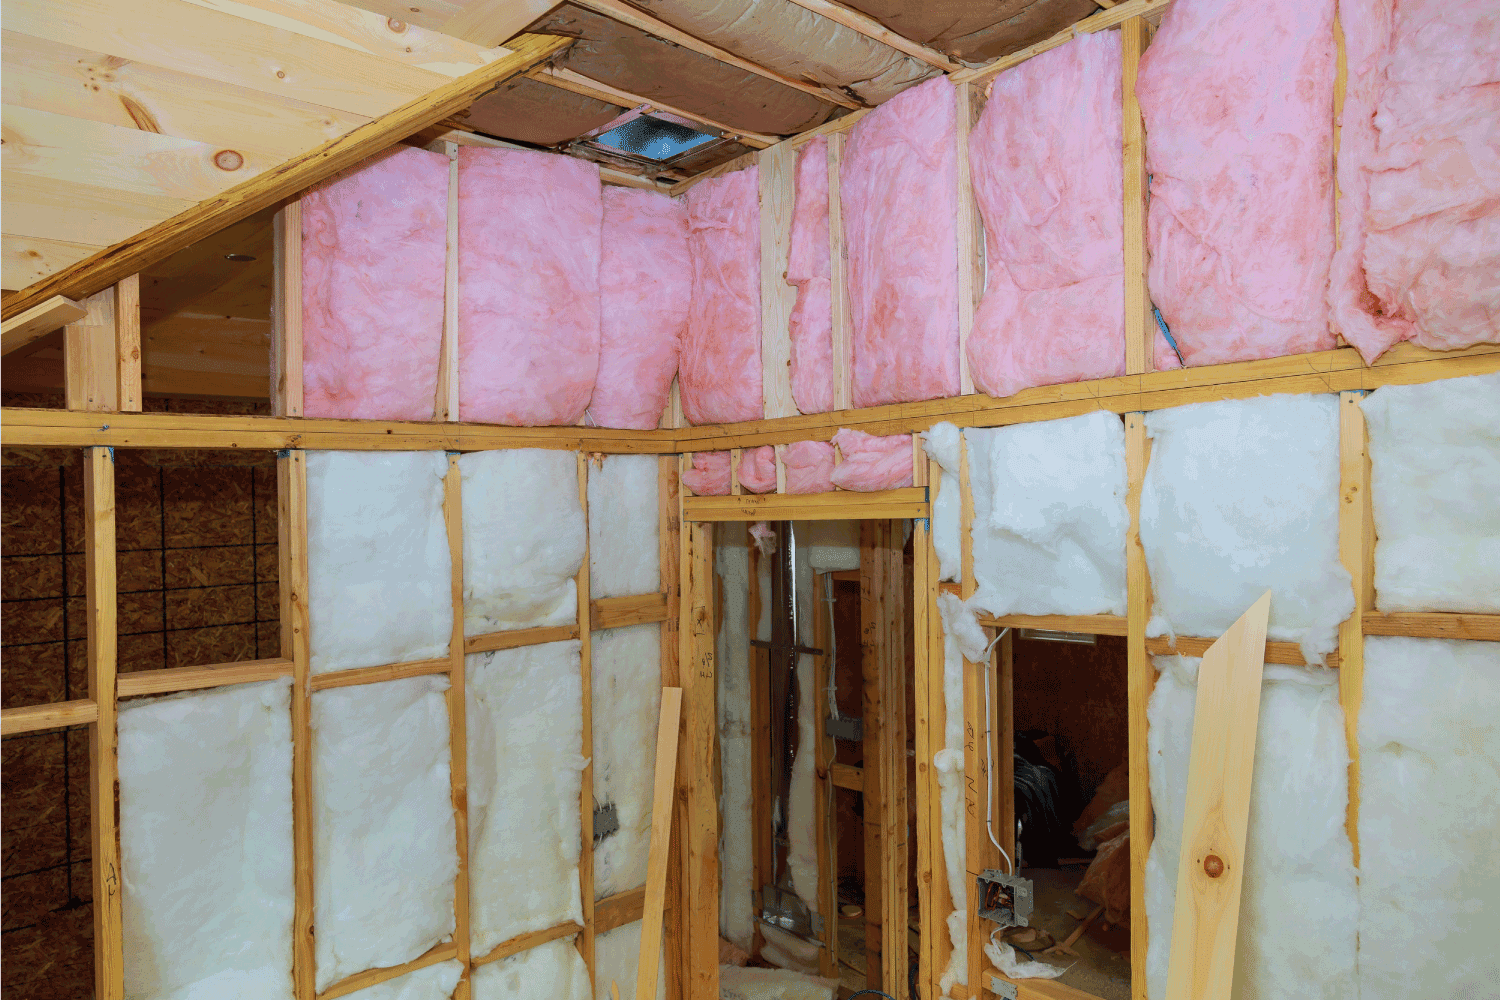 Wooden frame for future walls insulated with rock wool and fiberglass insulation